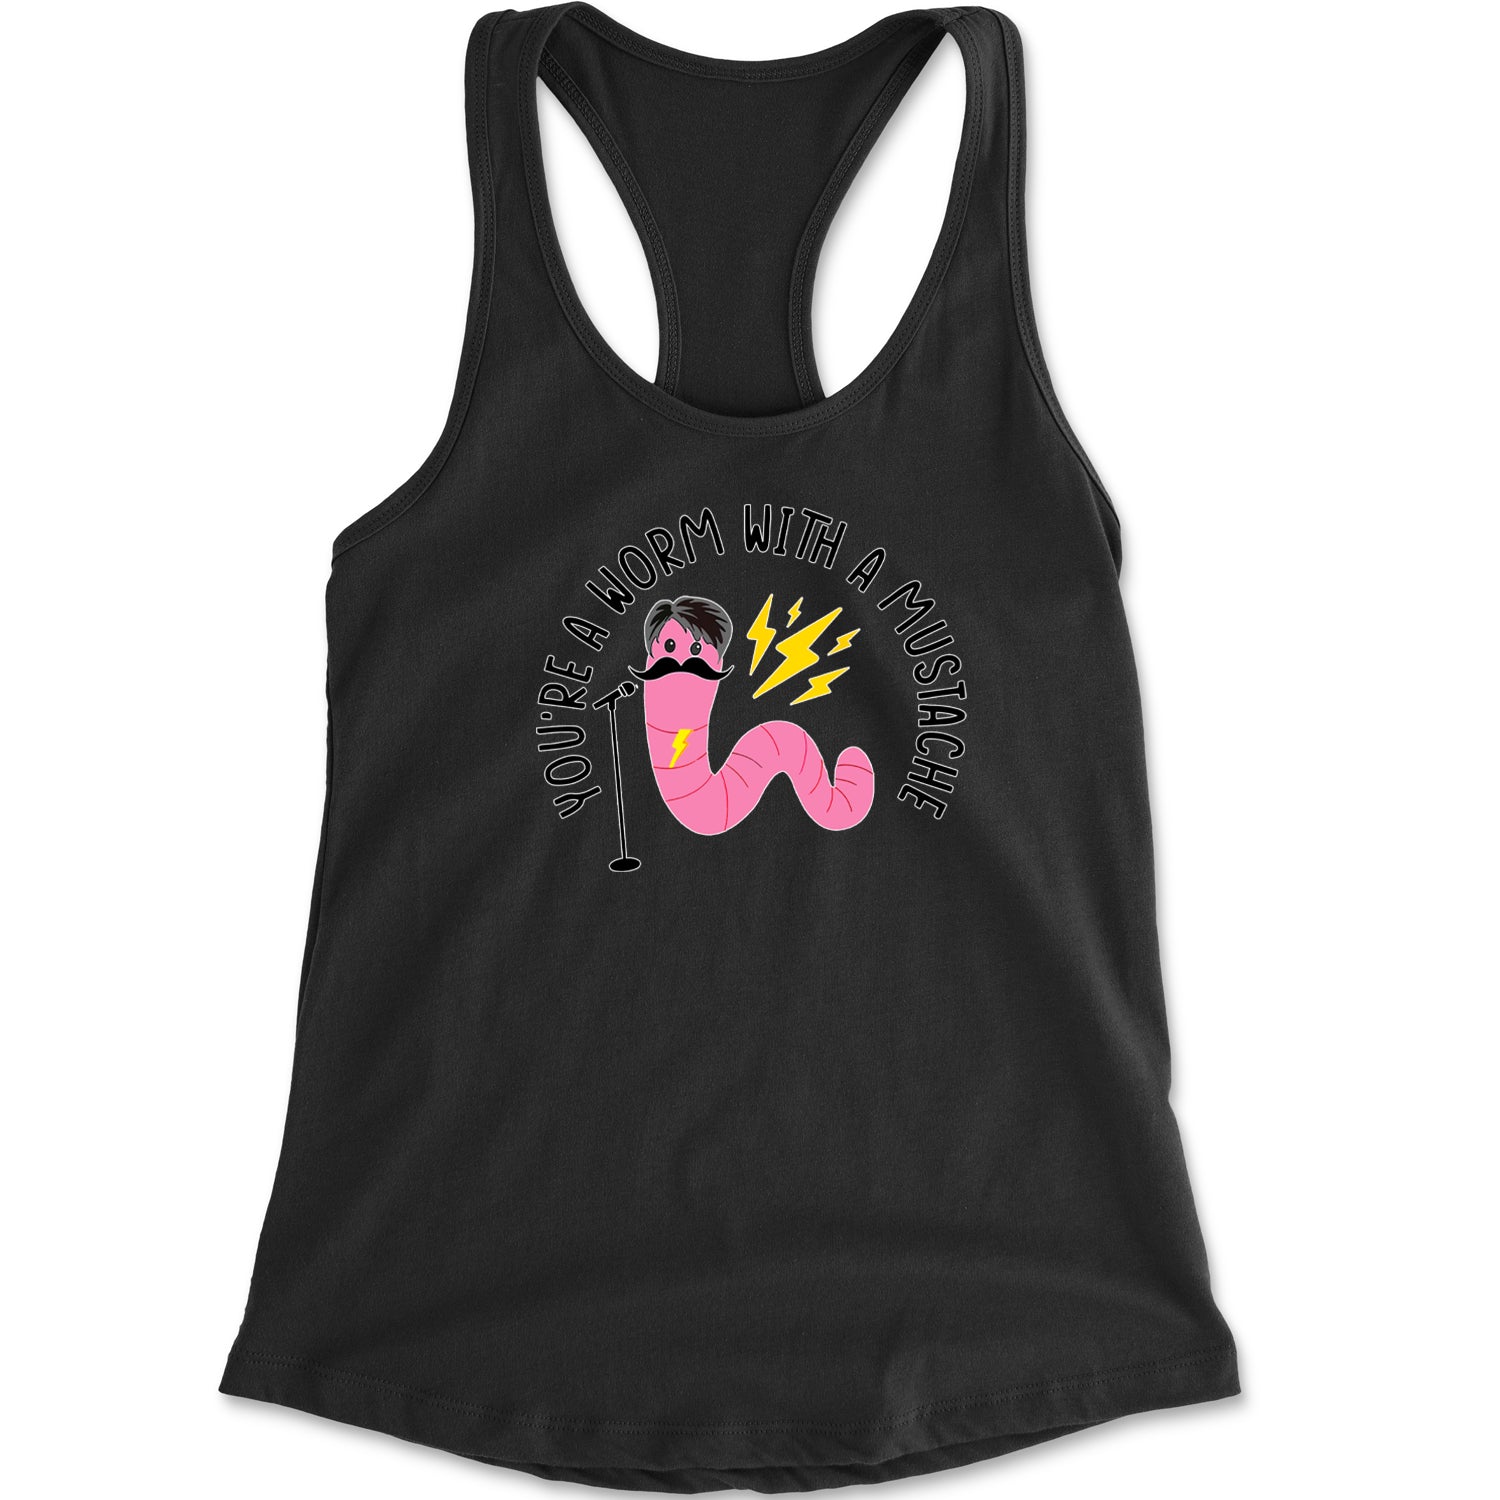 You're A Worm With A Mustache Tom Scandoval Racerback Tank Top for Women